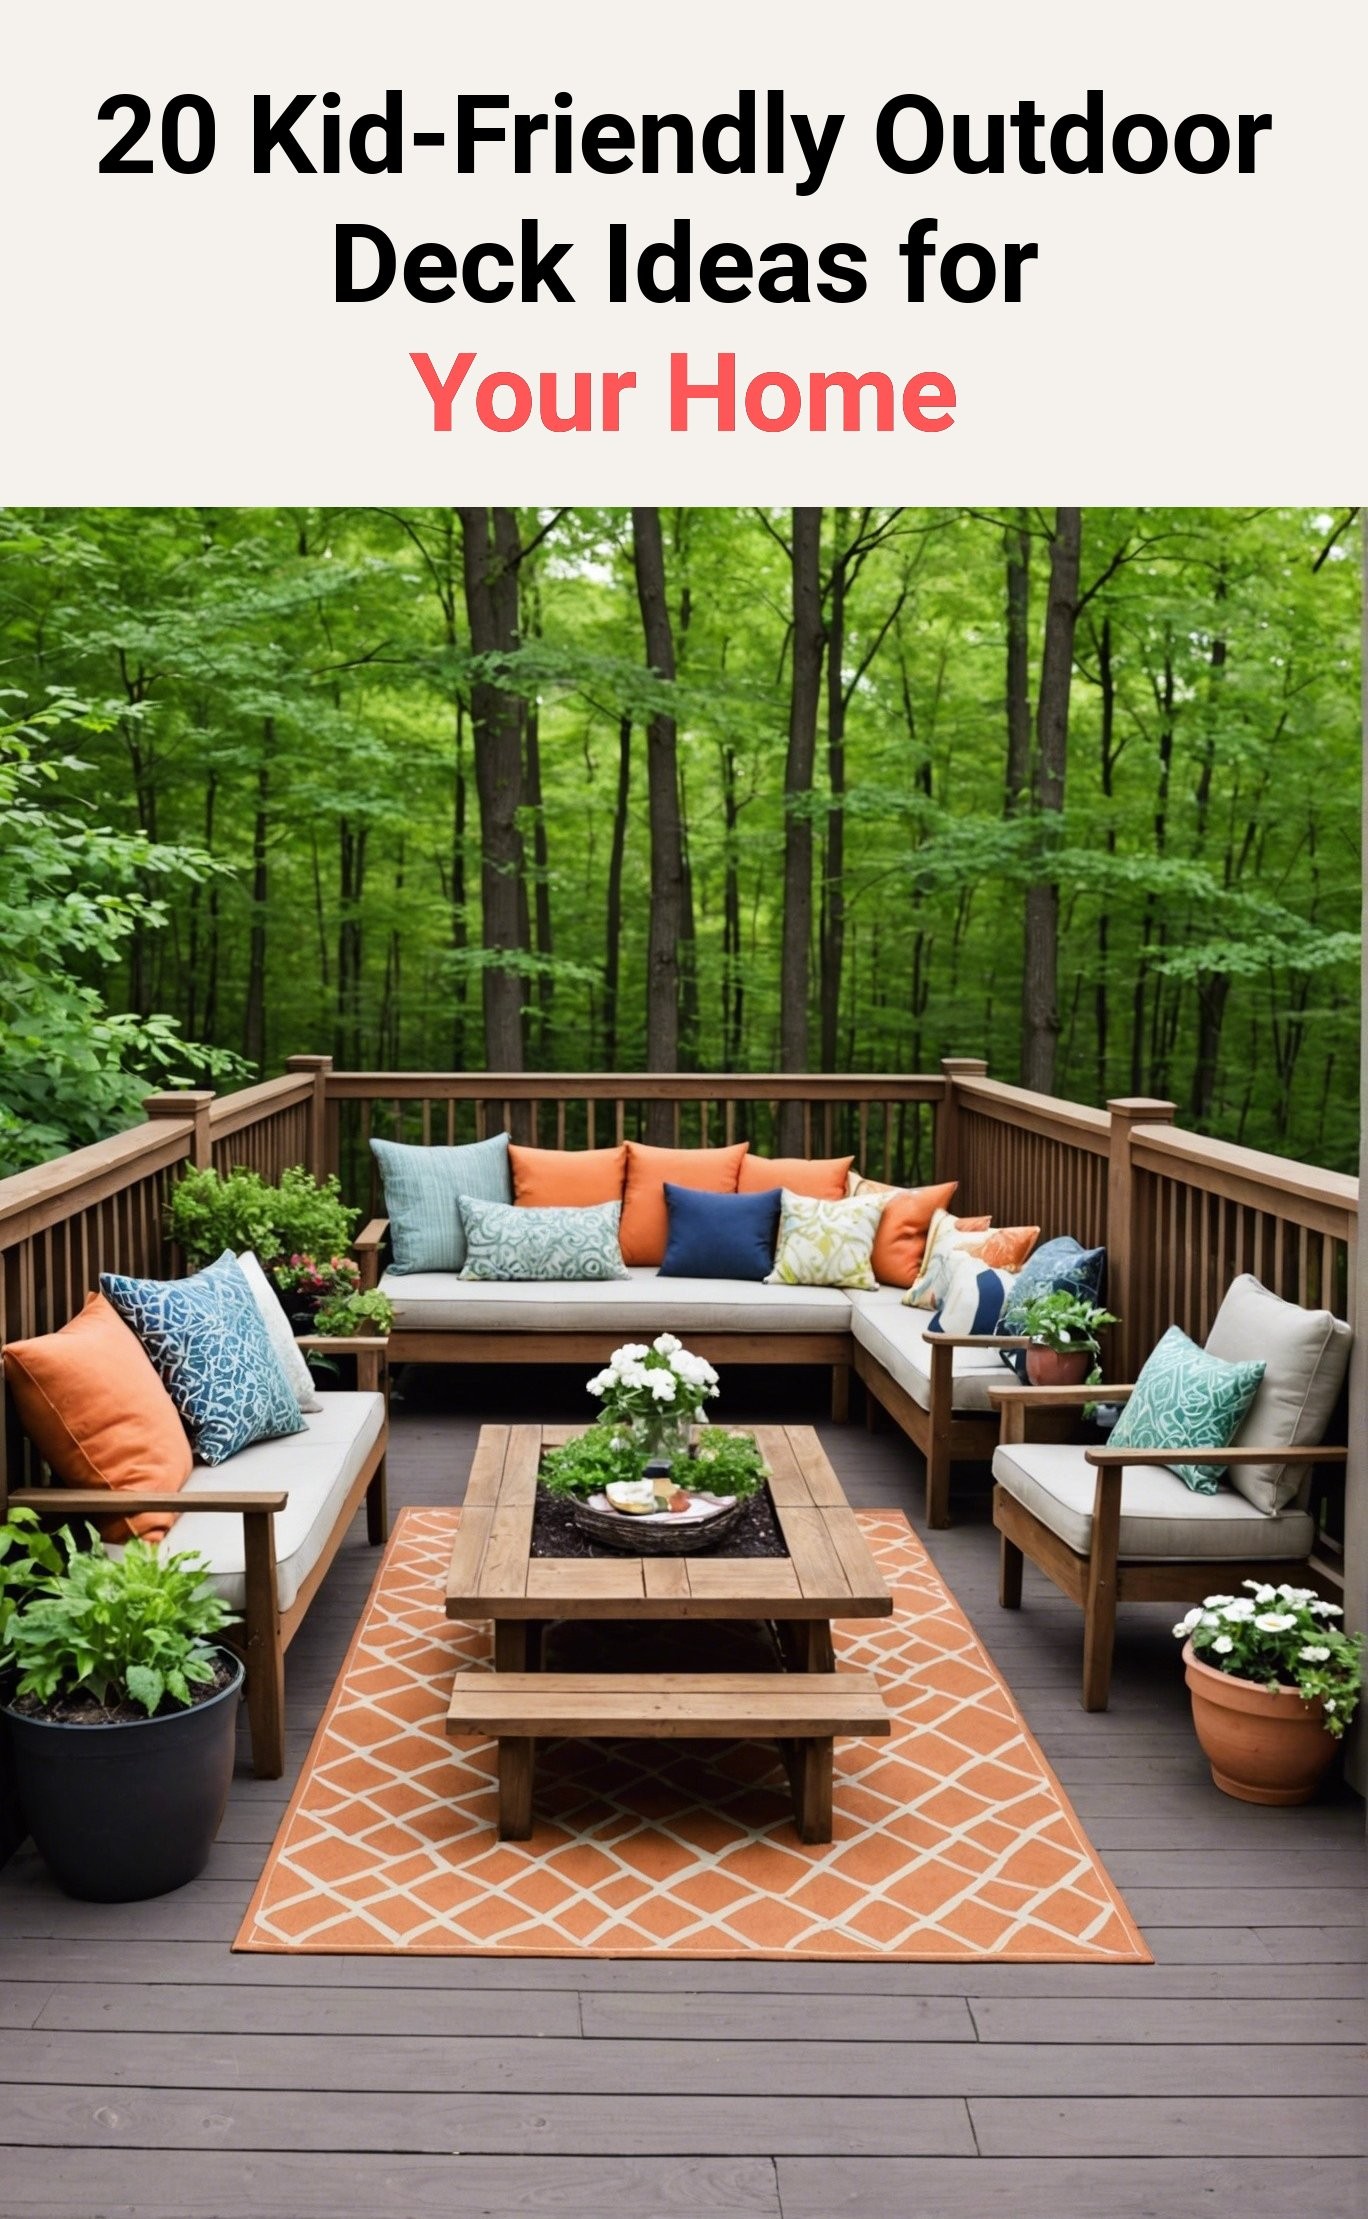 20 Kid-Friendly Outdoor Deck Ideas for Your Home